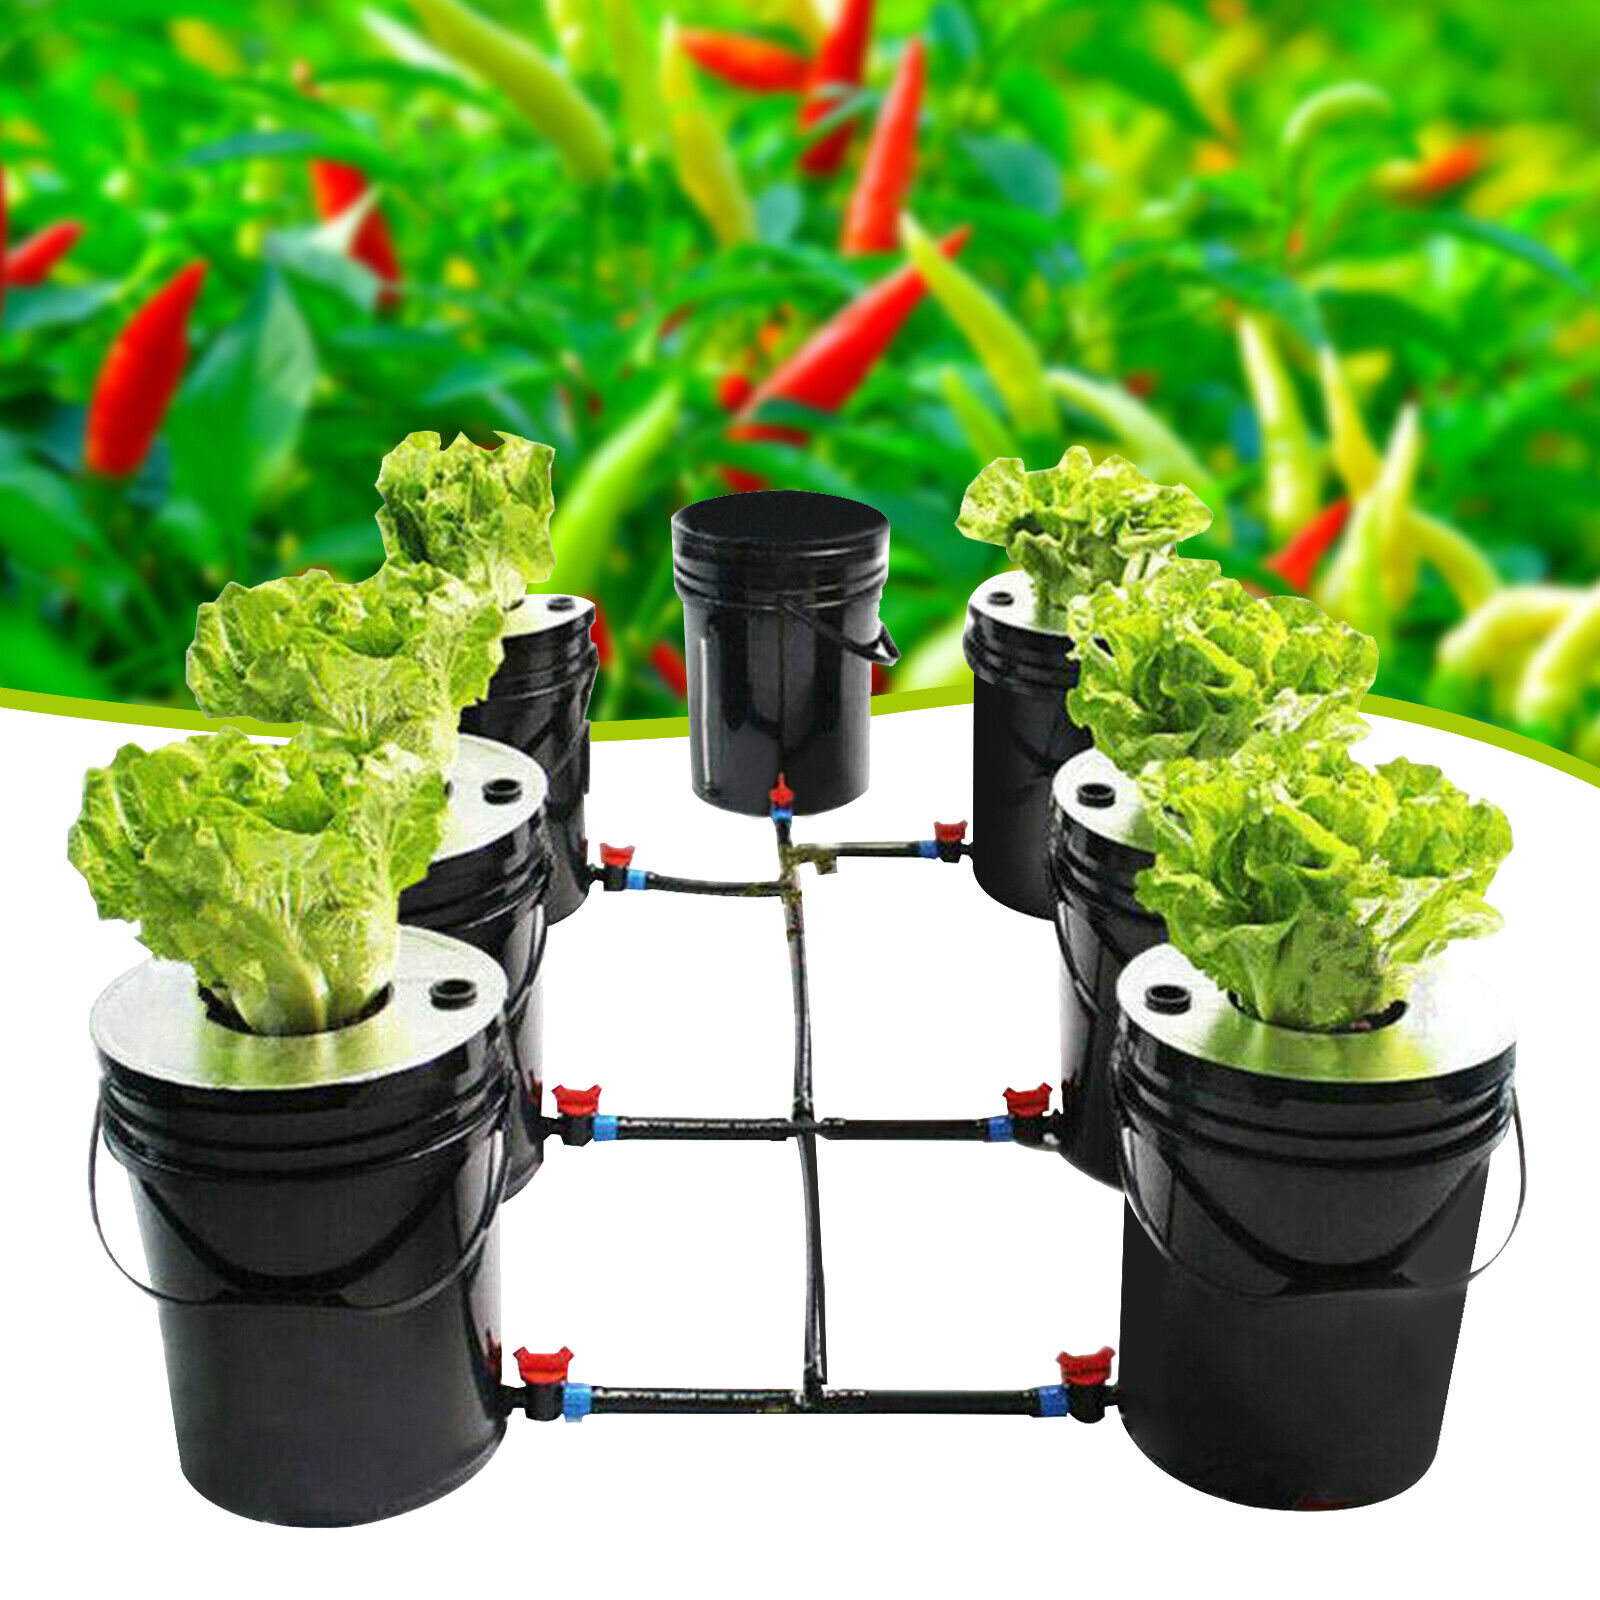 DWC 5 Gallons 6 Buckets Hydroponics Growing System Recirculating Growing Kit US